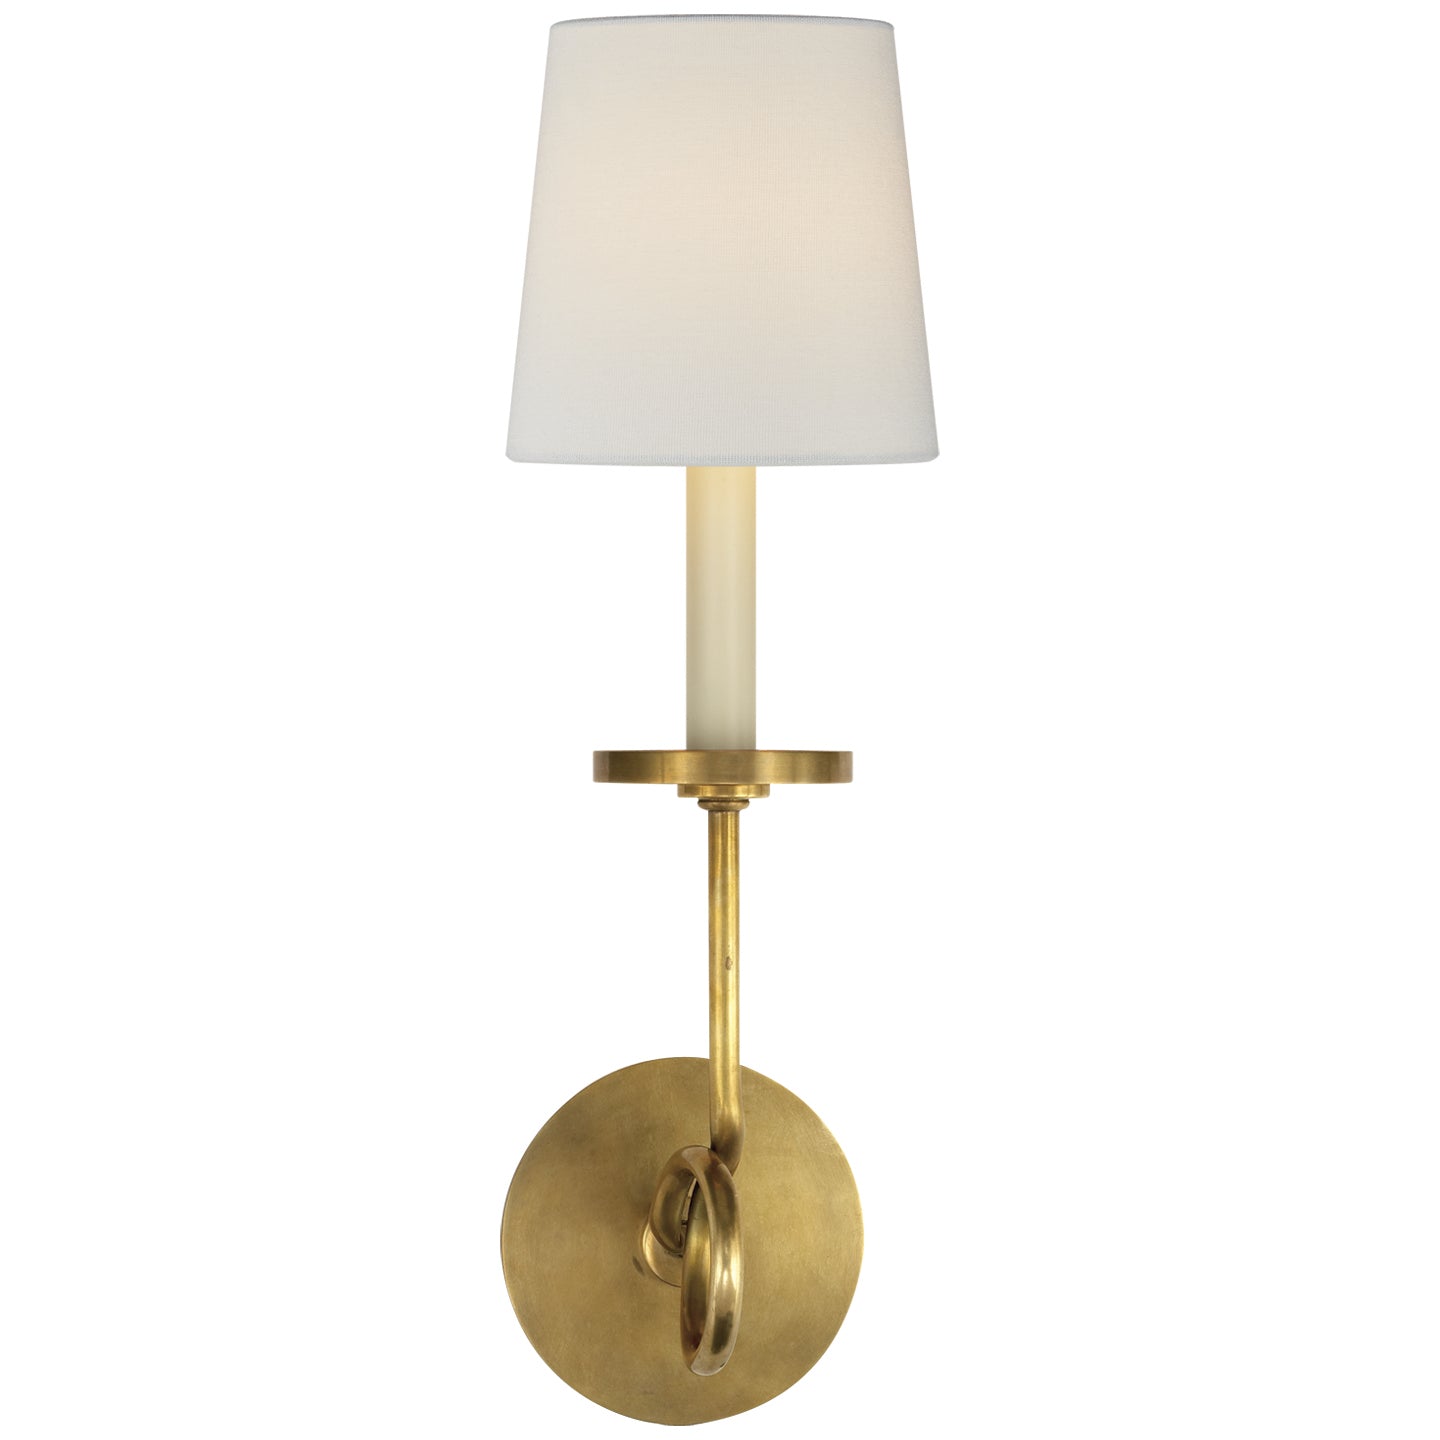 Load image into Gallery viewer, Visual Comfort Signature - CHD 1610AB-L - One Light Wall Sconce - Symmetric Twist - Antique-Burnished Brass
